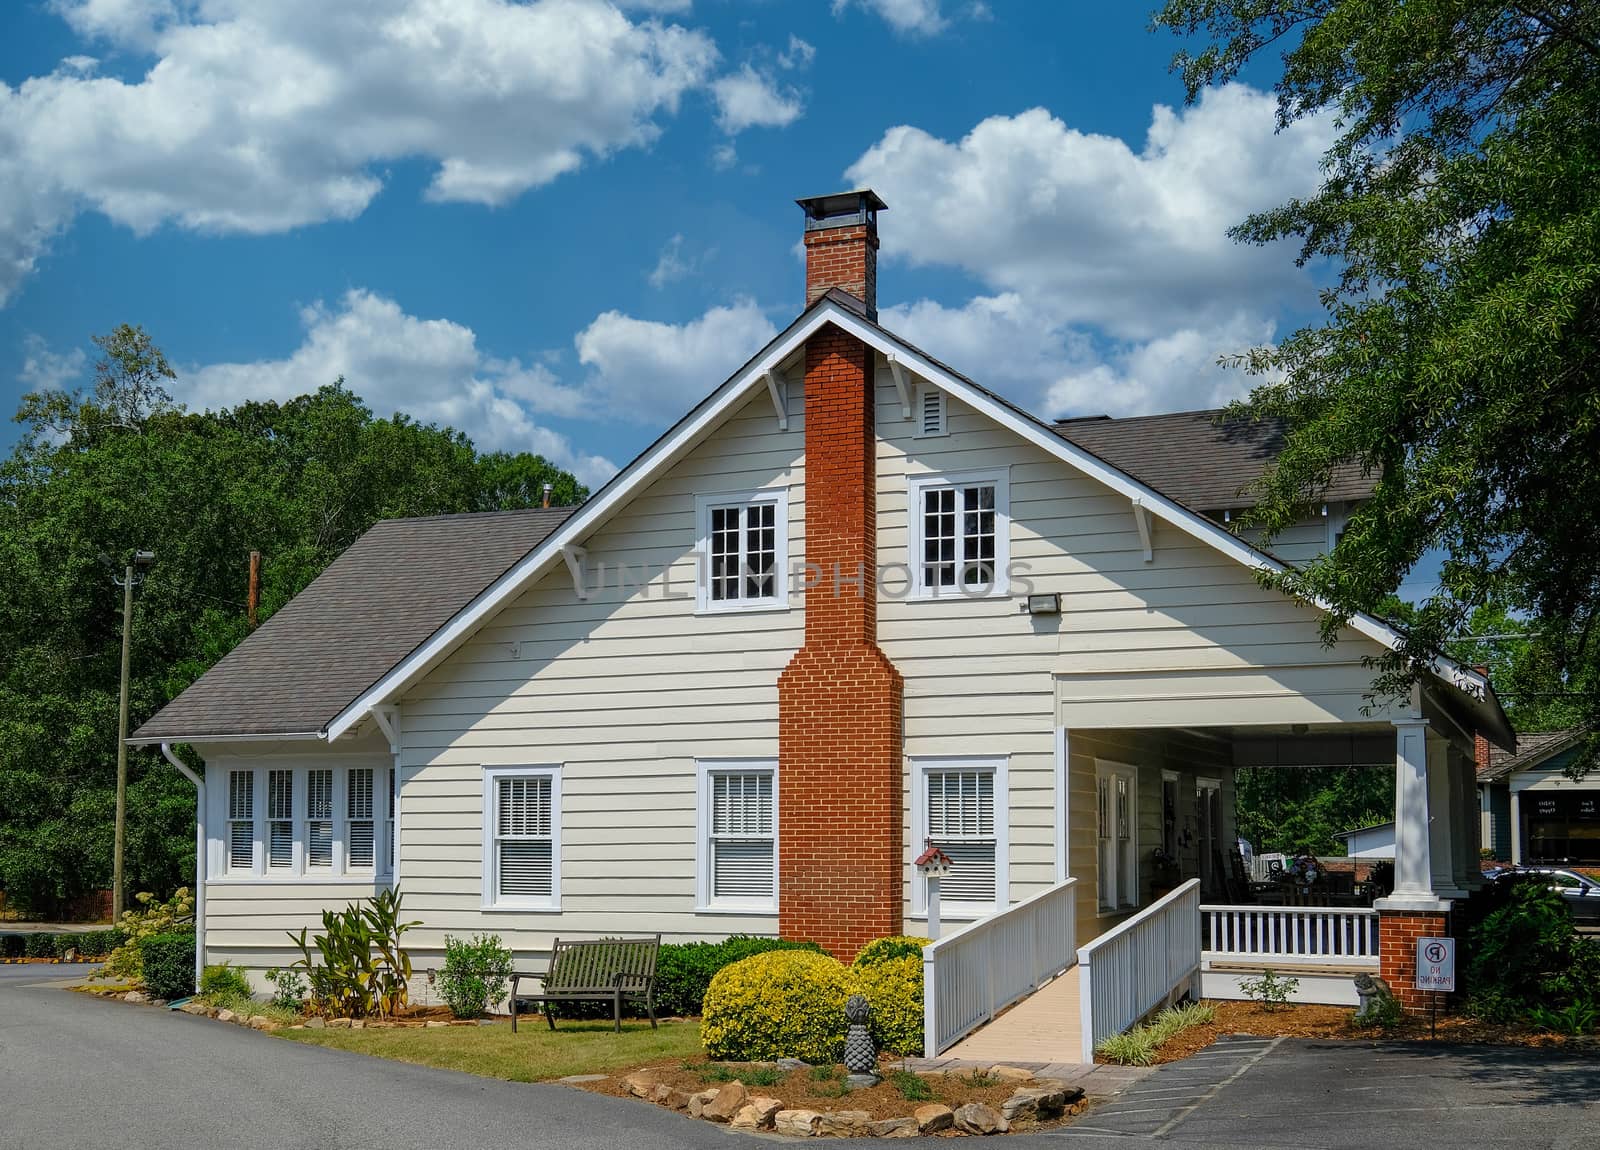 The Alpharetta Historic District contains several historic buildings dating from the late 19th century and older, and includes dining and shopping.